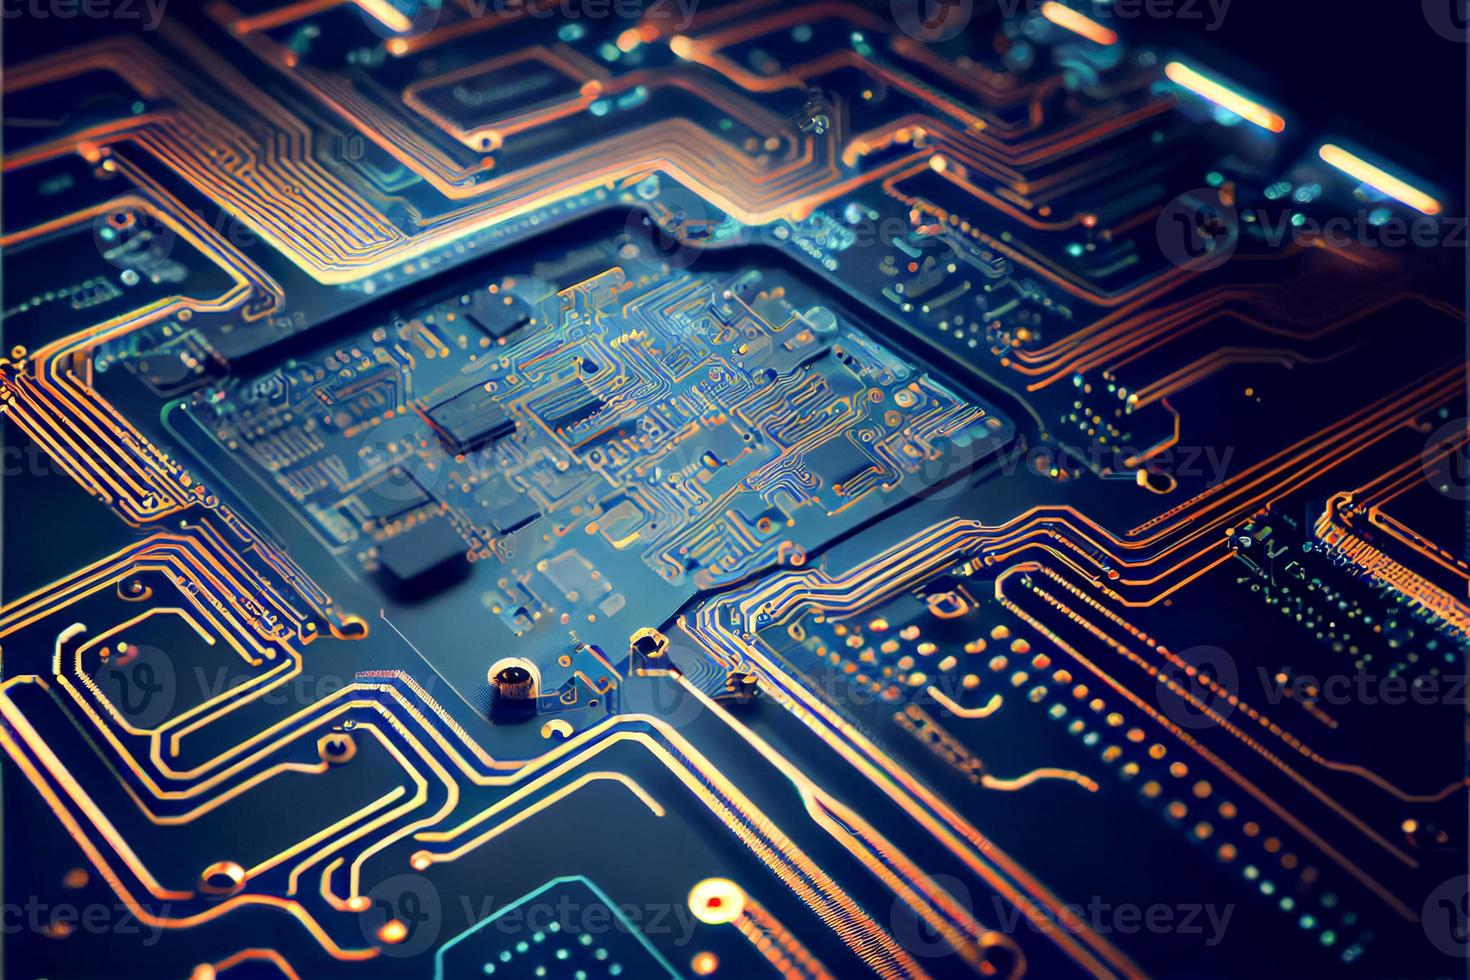 Abstract Electronic Circuit Board Background 3D and illustrations photo